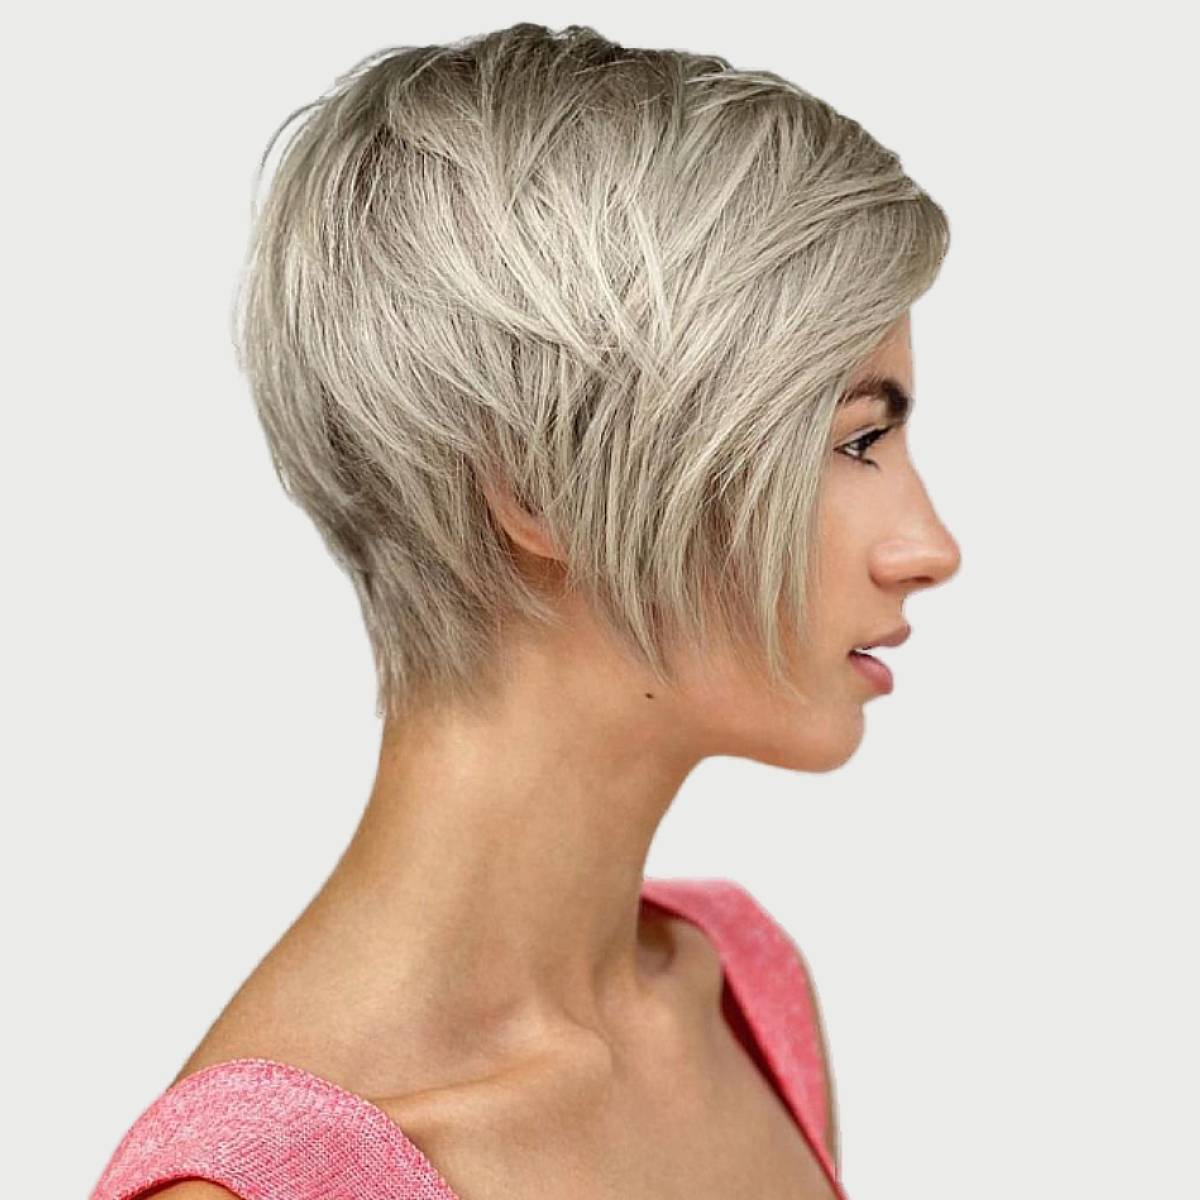 Best Haircuts for Women 2023: 64 Popular Haircut Ideas to Try | Glamour